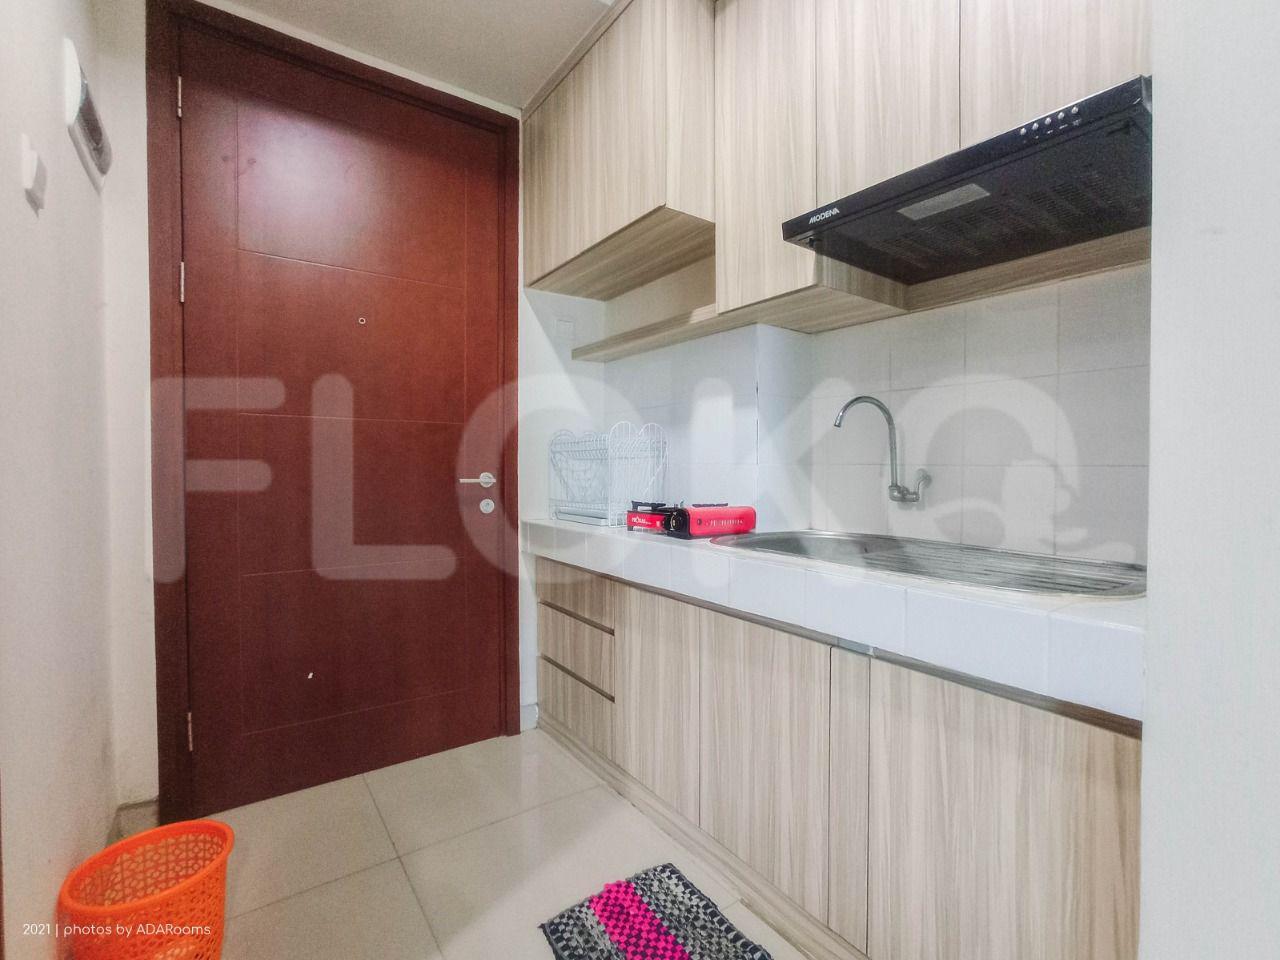 1 Bedroom on 11th Floor fpa6b1 for Rent in Springhill Terrace Residence